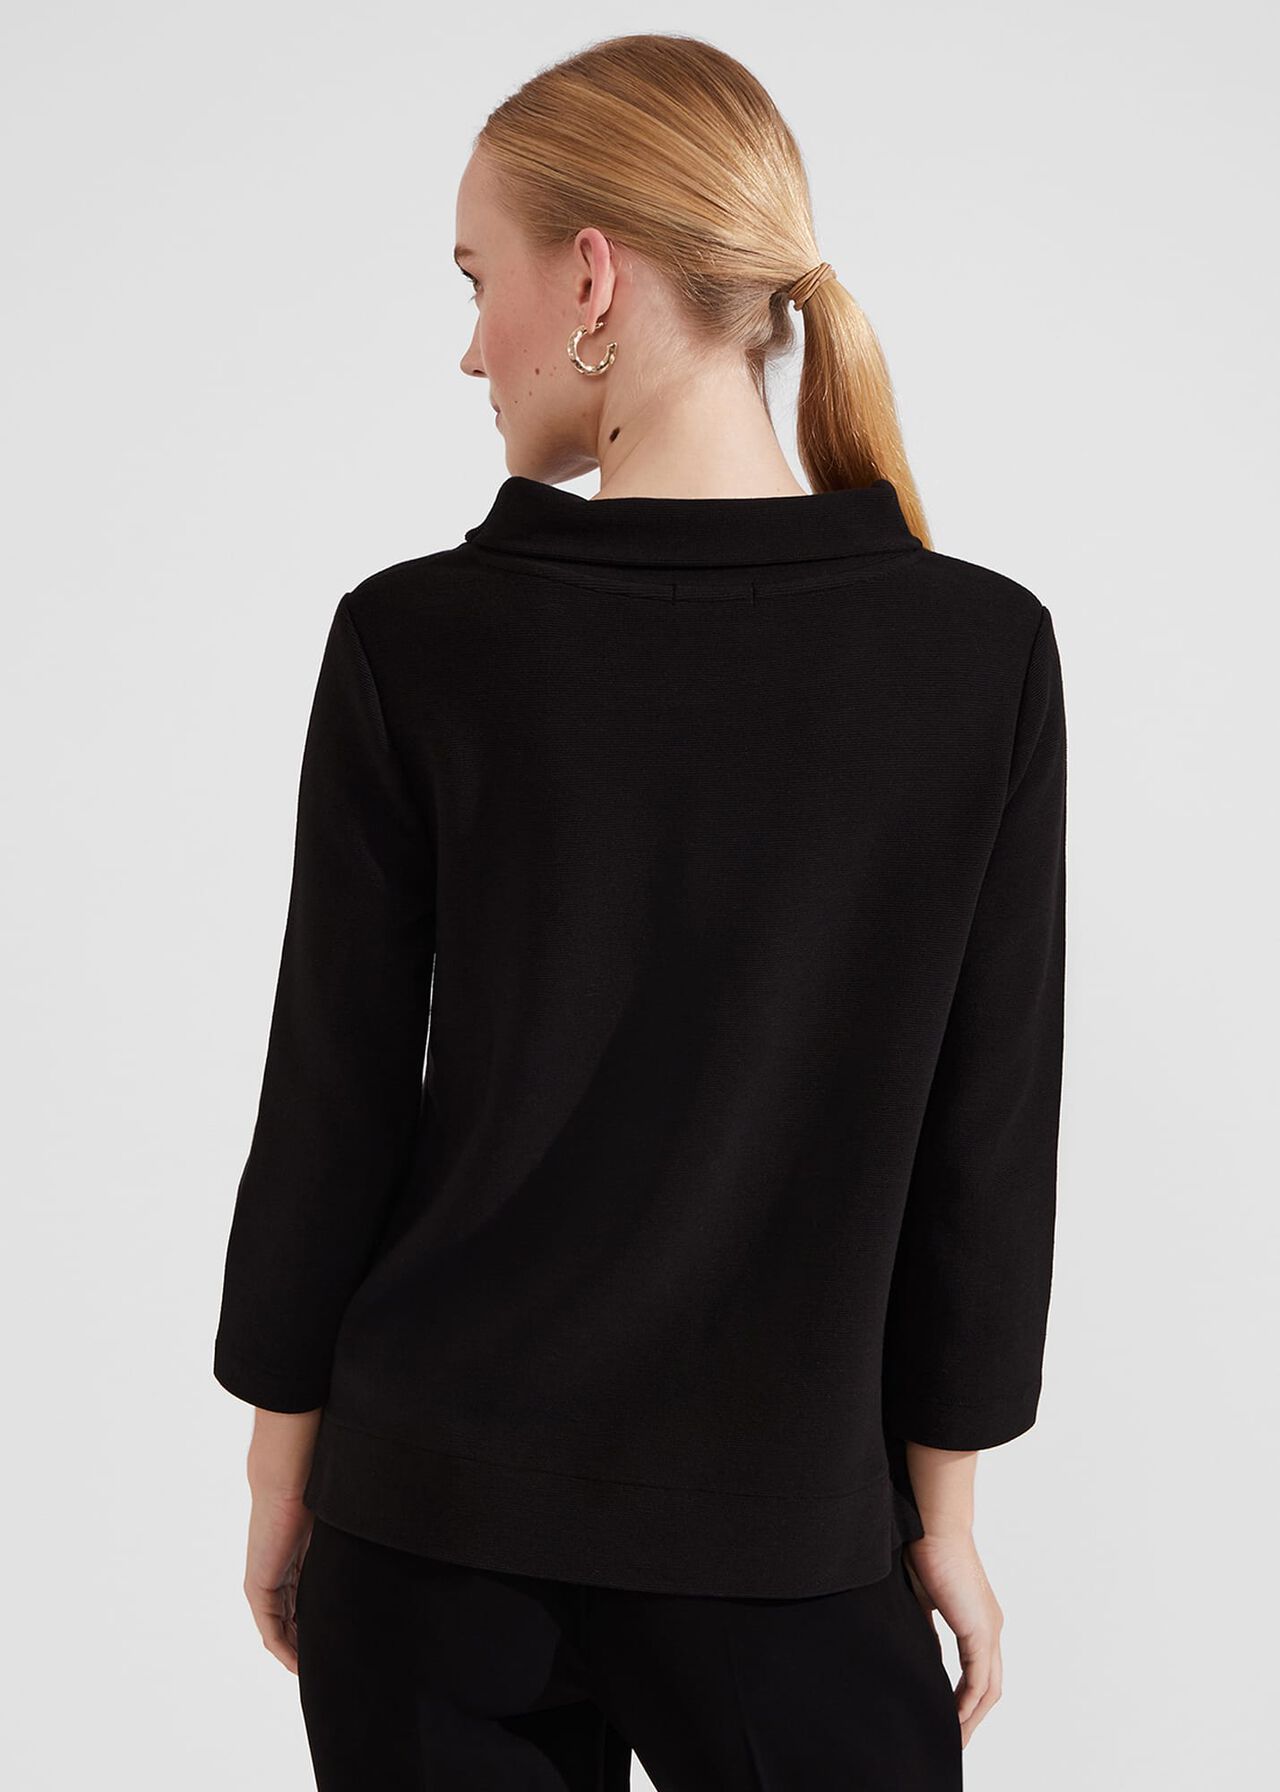 Betsy Textured Top With Cotton , Black, hi-res